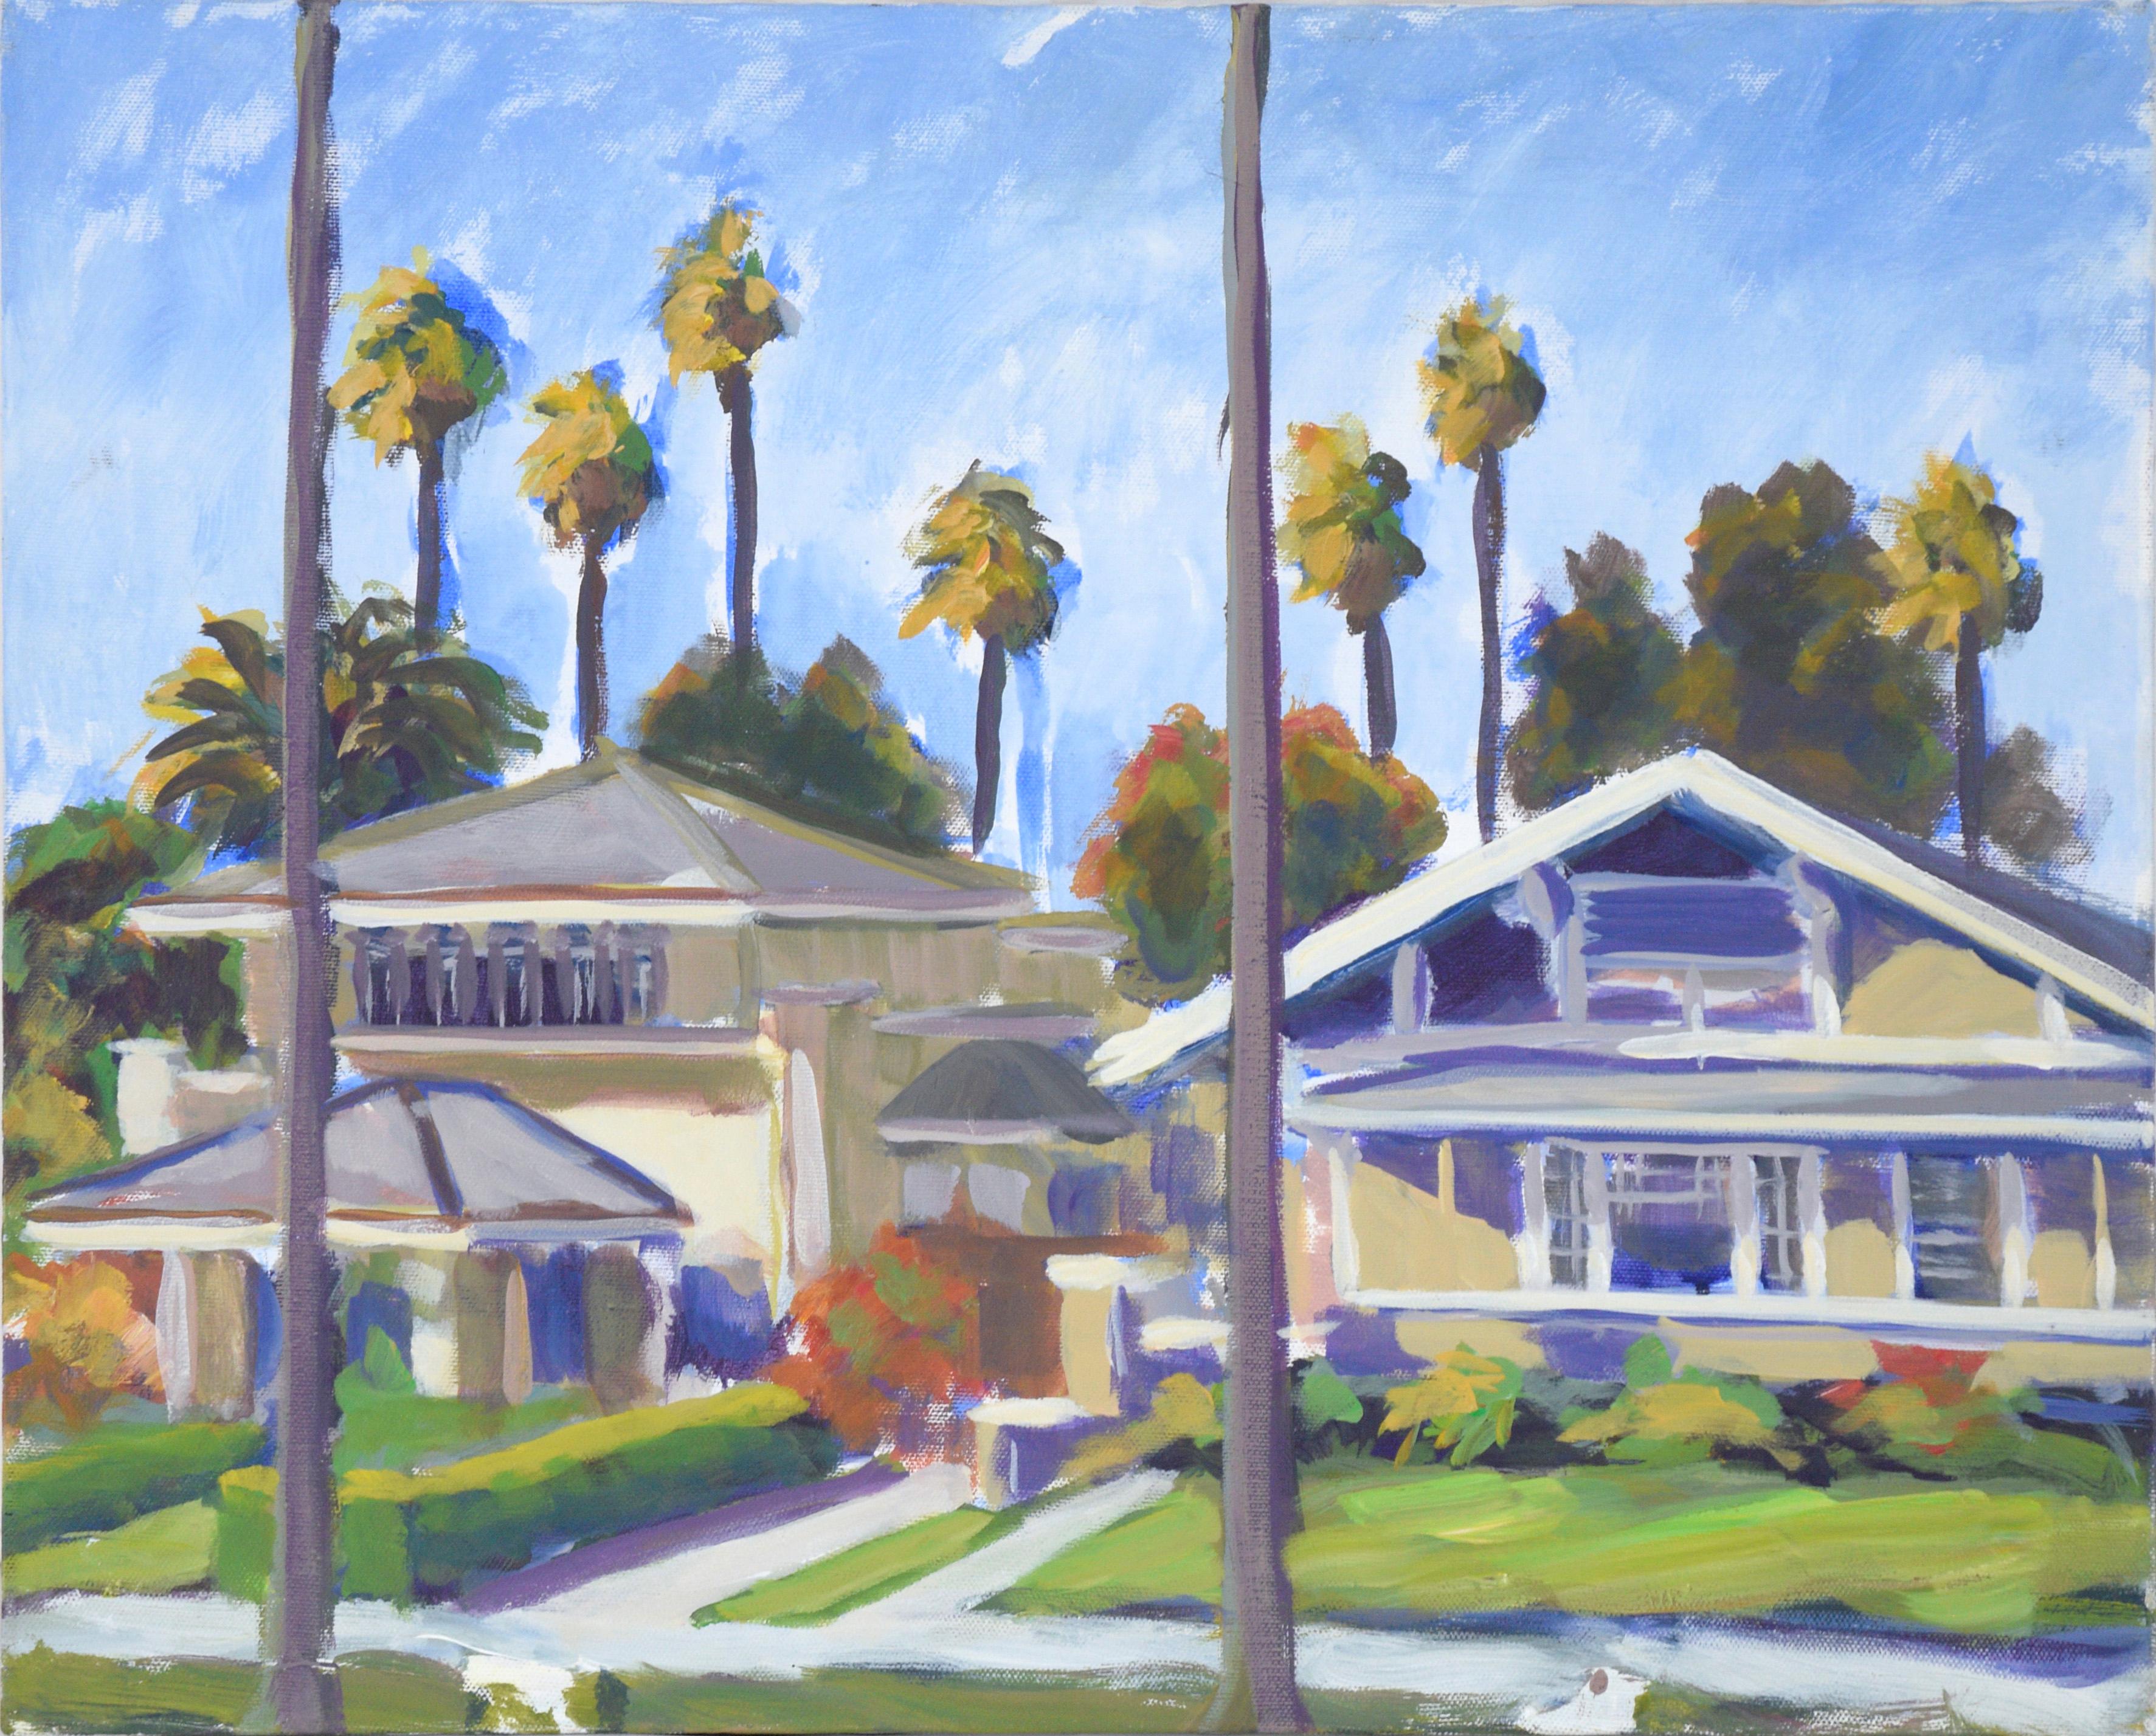 Nick White Animal Painting - California Suburbs - Plein Aire Landscape in Acrylic on Canvas